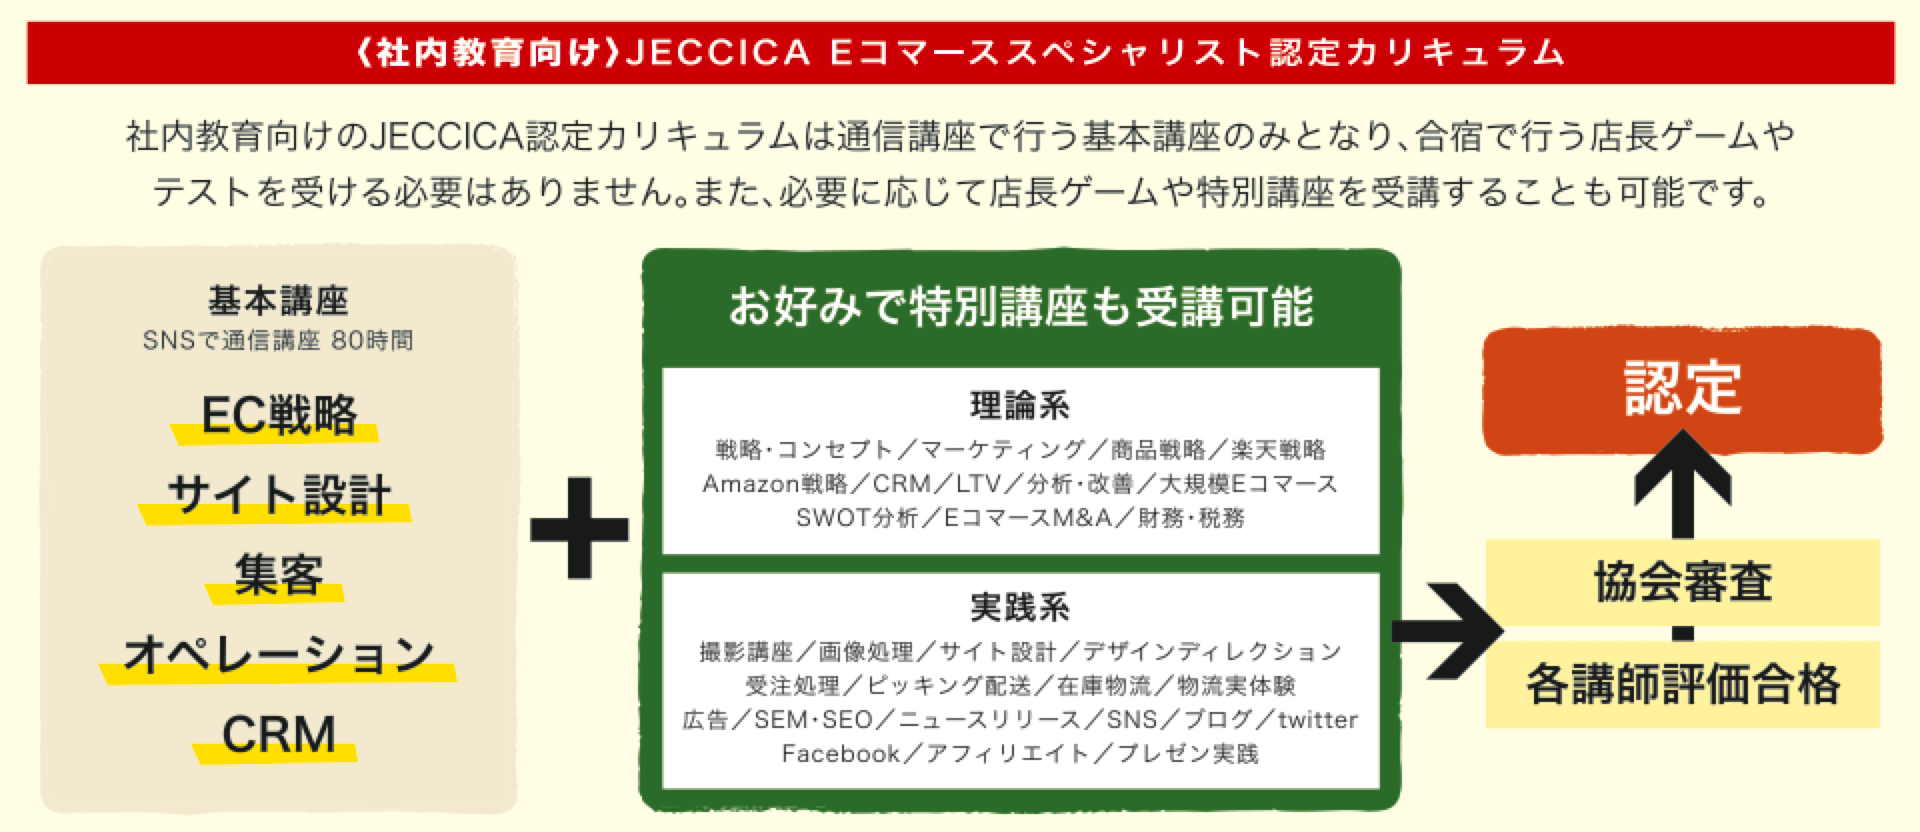 JECCICAカリキュラム全体フロー